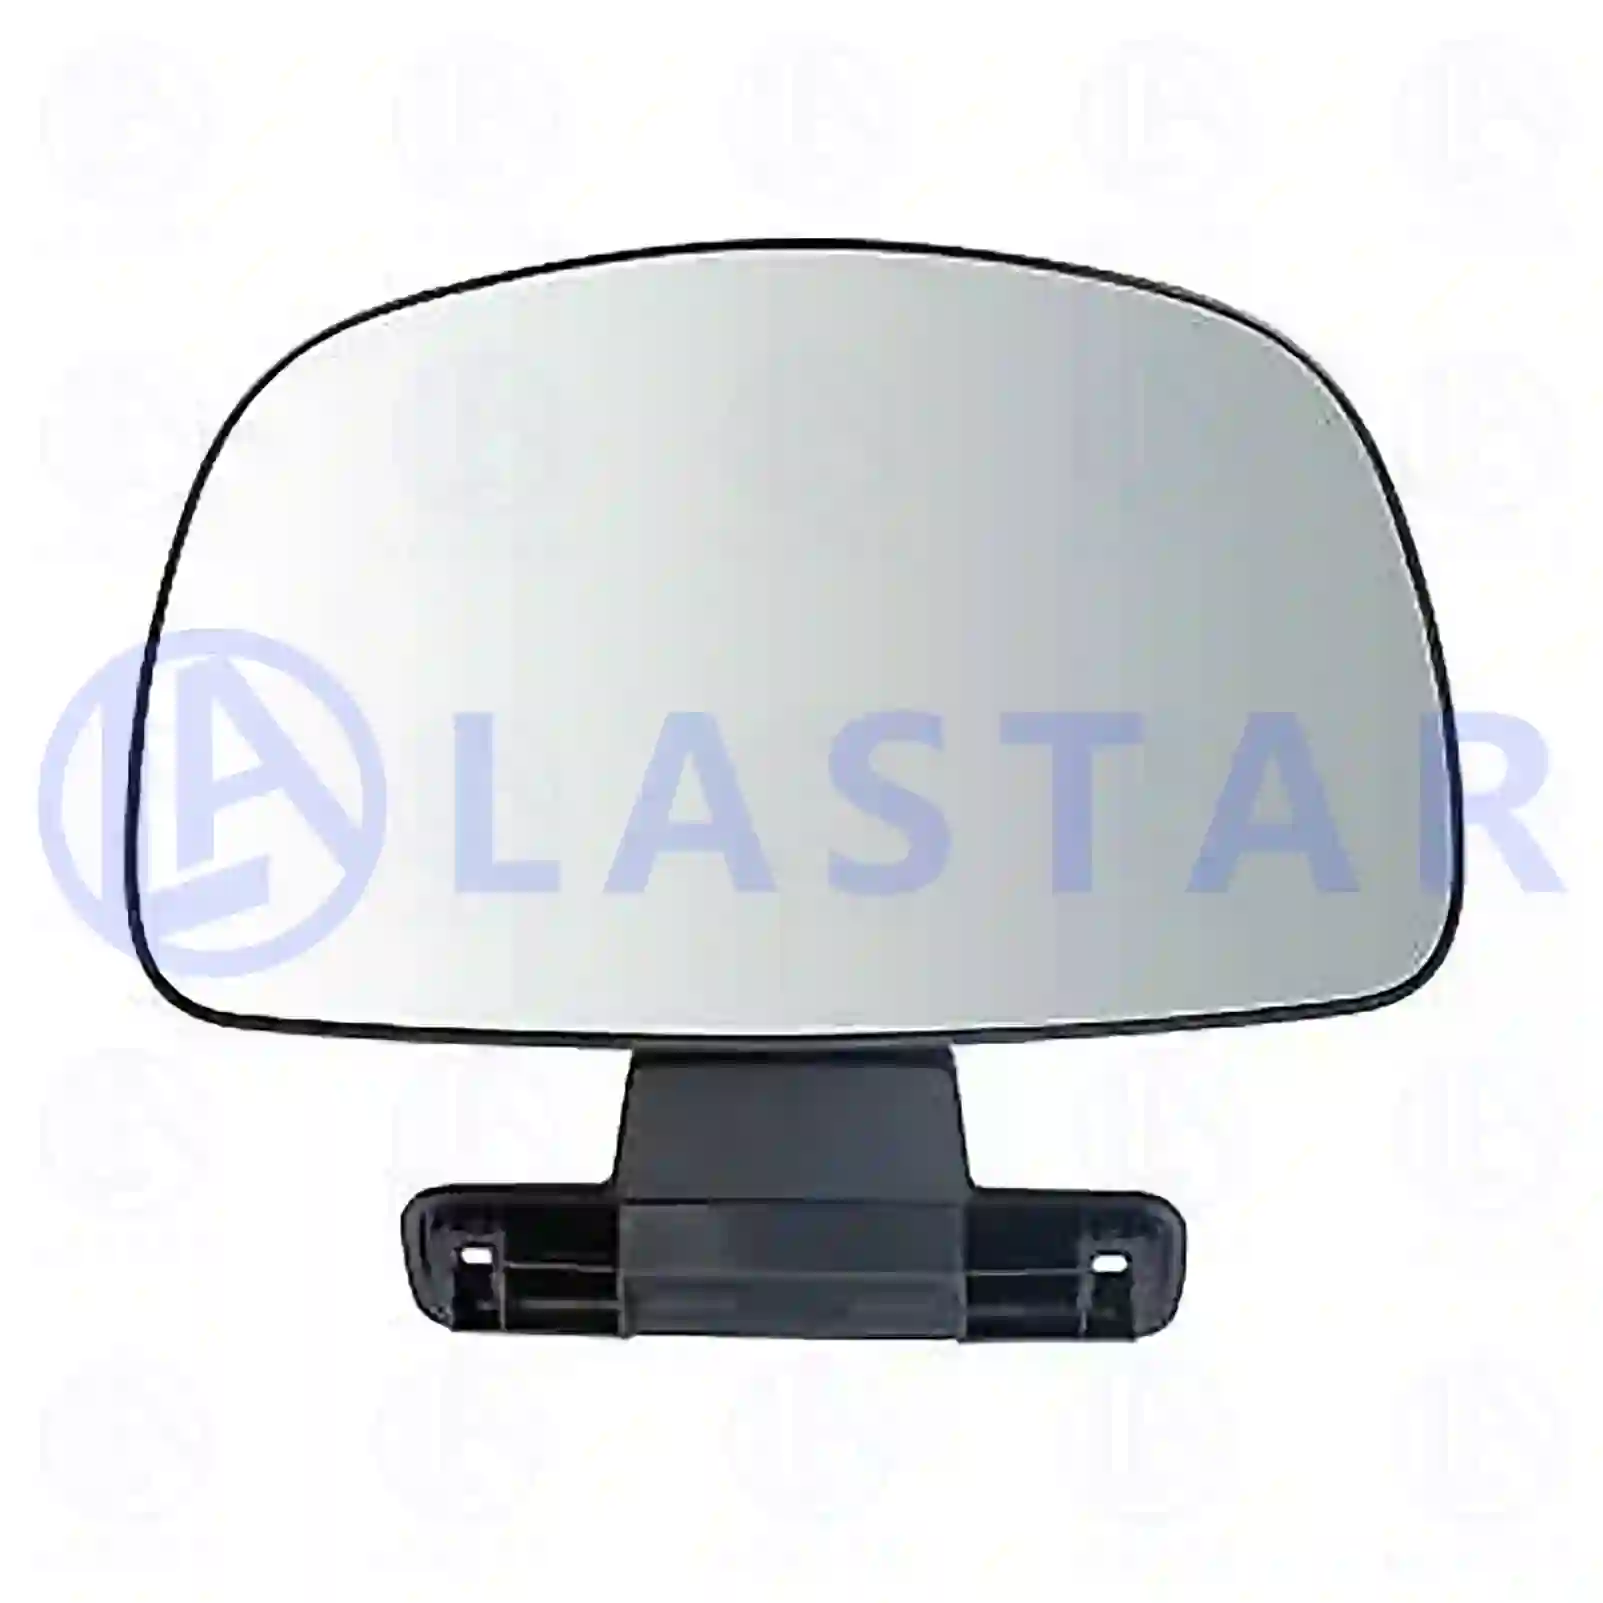 Kerb observation mirror, right, left, 77720135, 1714635, 1718252, 7478493162, 7484561115, 78493162 ||  77720135 Lastar Spare Part | Truck Spare Parts, Auotomotive Spare Parts Kerb observation mirror, right, left, 77720135, 1714635, 1718252, 7478493162, 7484561115, 78493162 ||  77720135 Lastar Spare Part | Truck Spare Parts, Auotomotive Spare Parts